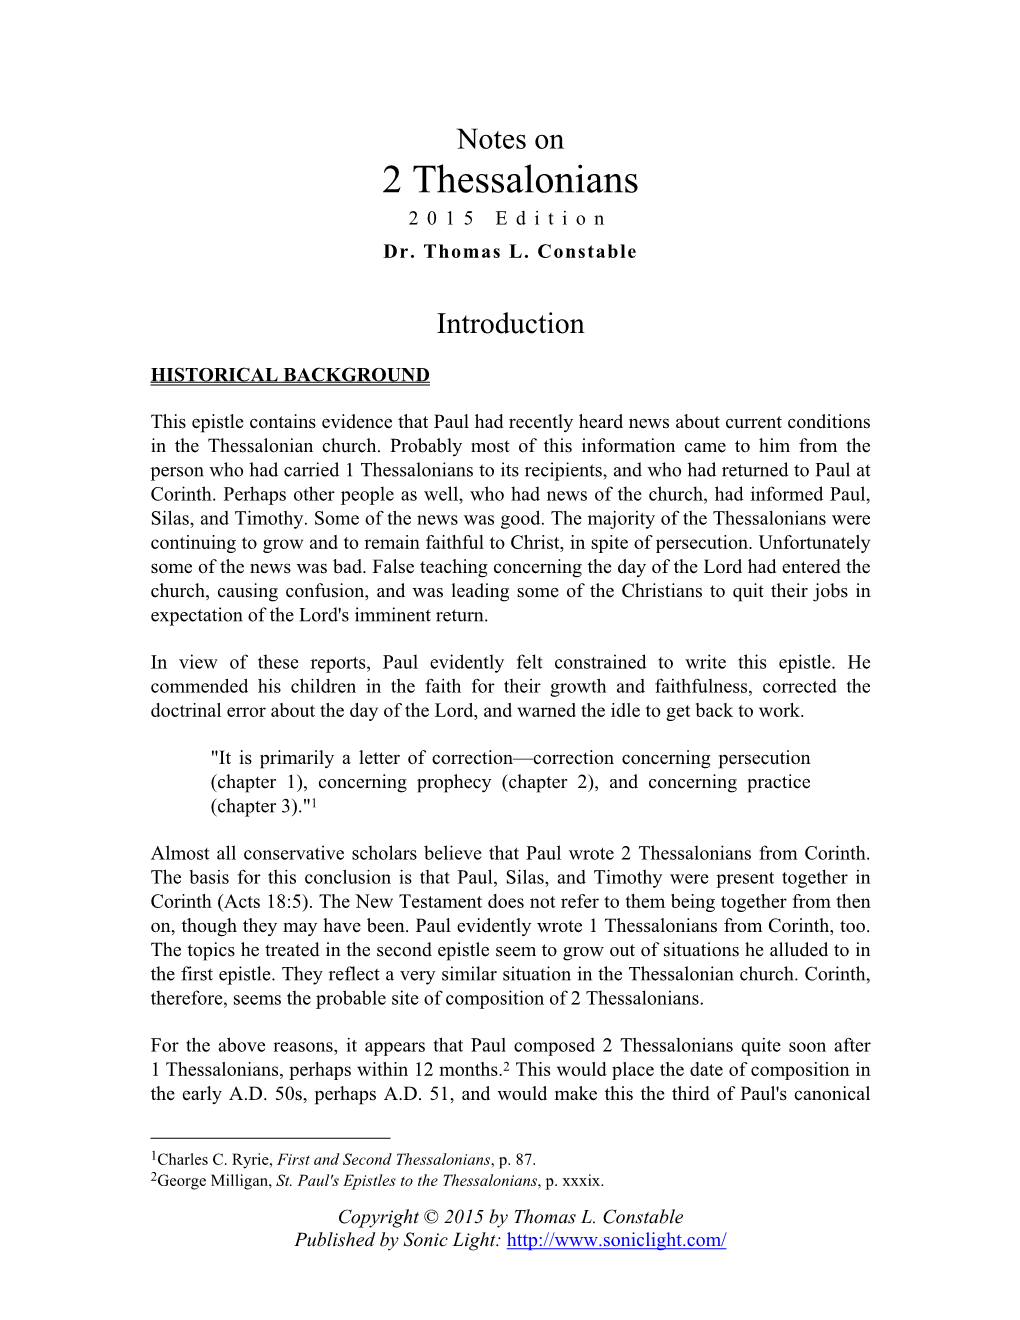 2 Thessalonians 2015 Edition Dr